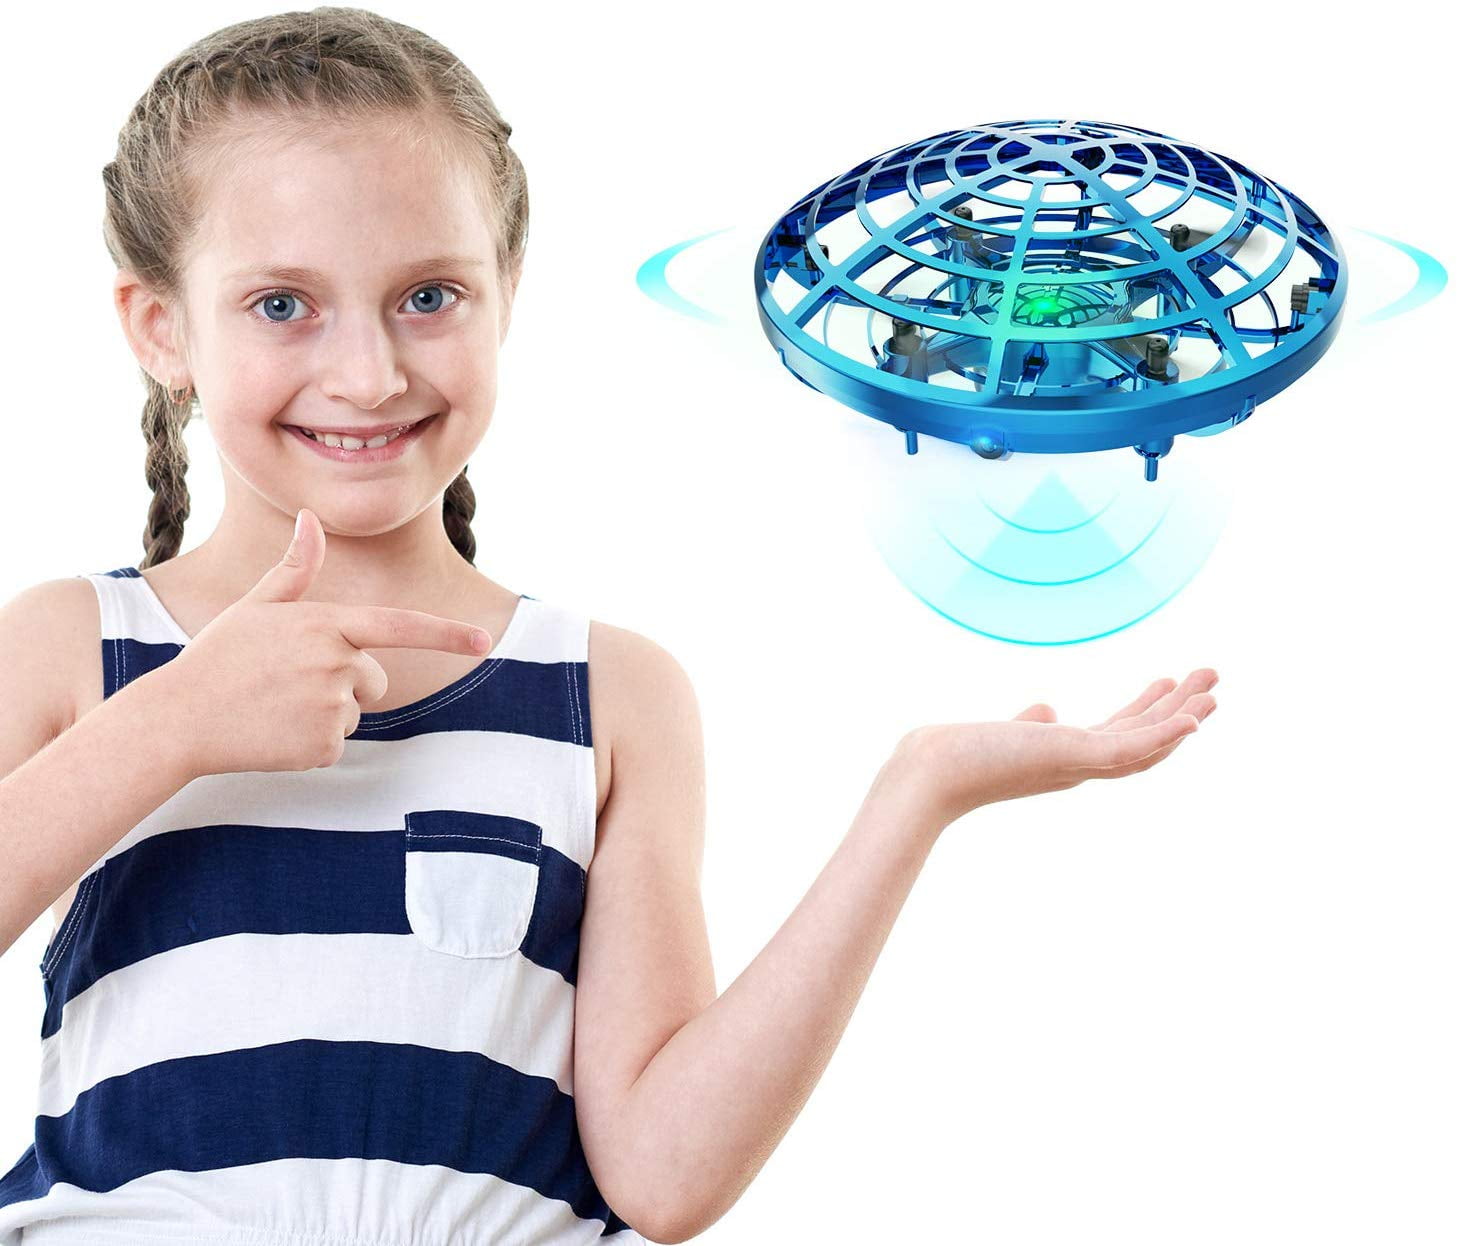 Blue Hand Controlled Drone Toys Easy Hand Operated Mini Drone for Boys Girls Beginners UFO Shaped New Upgrade Flying Toys Drones for Kids 